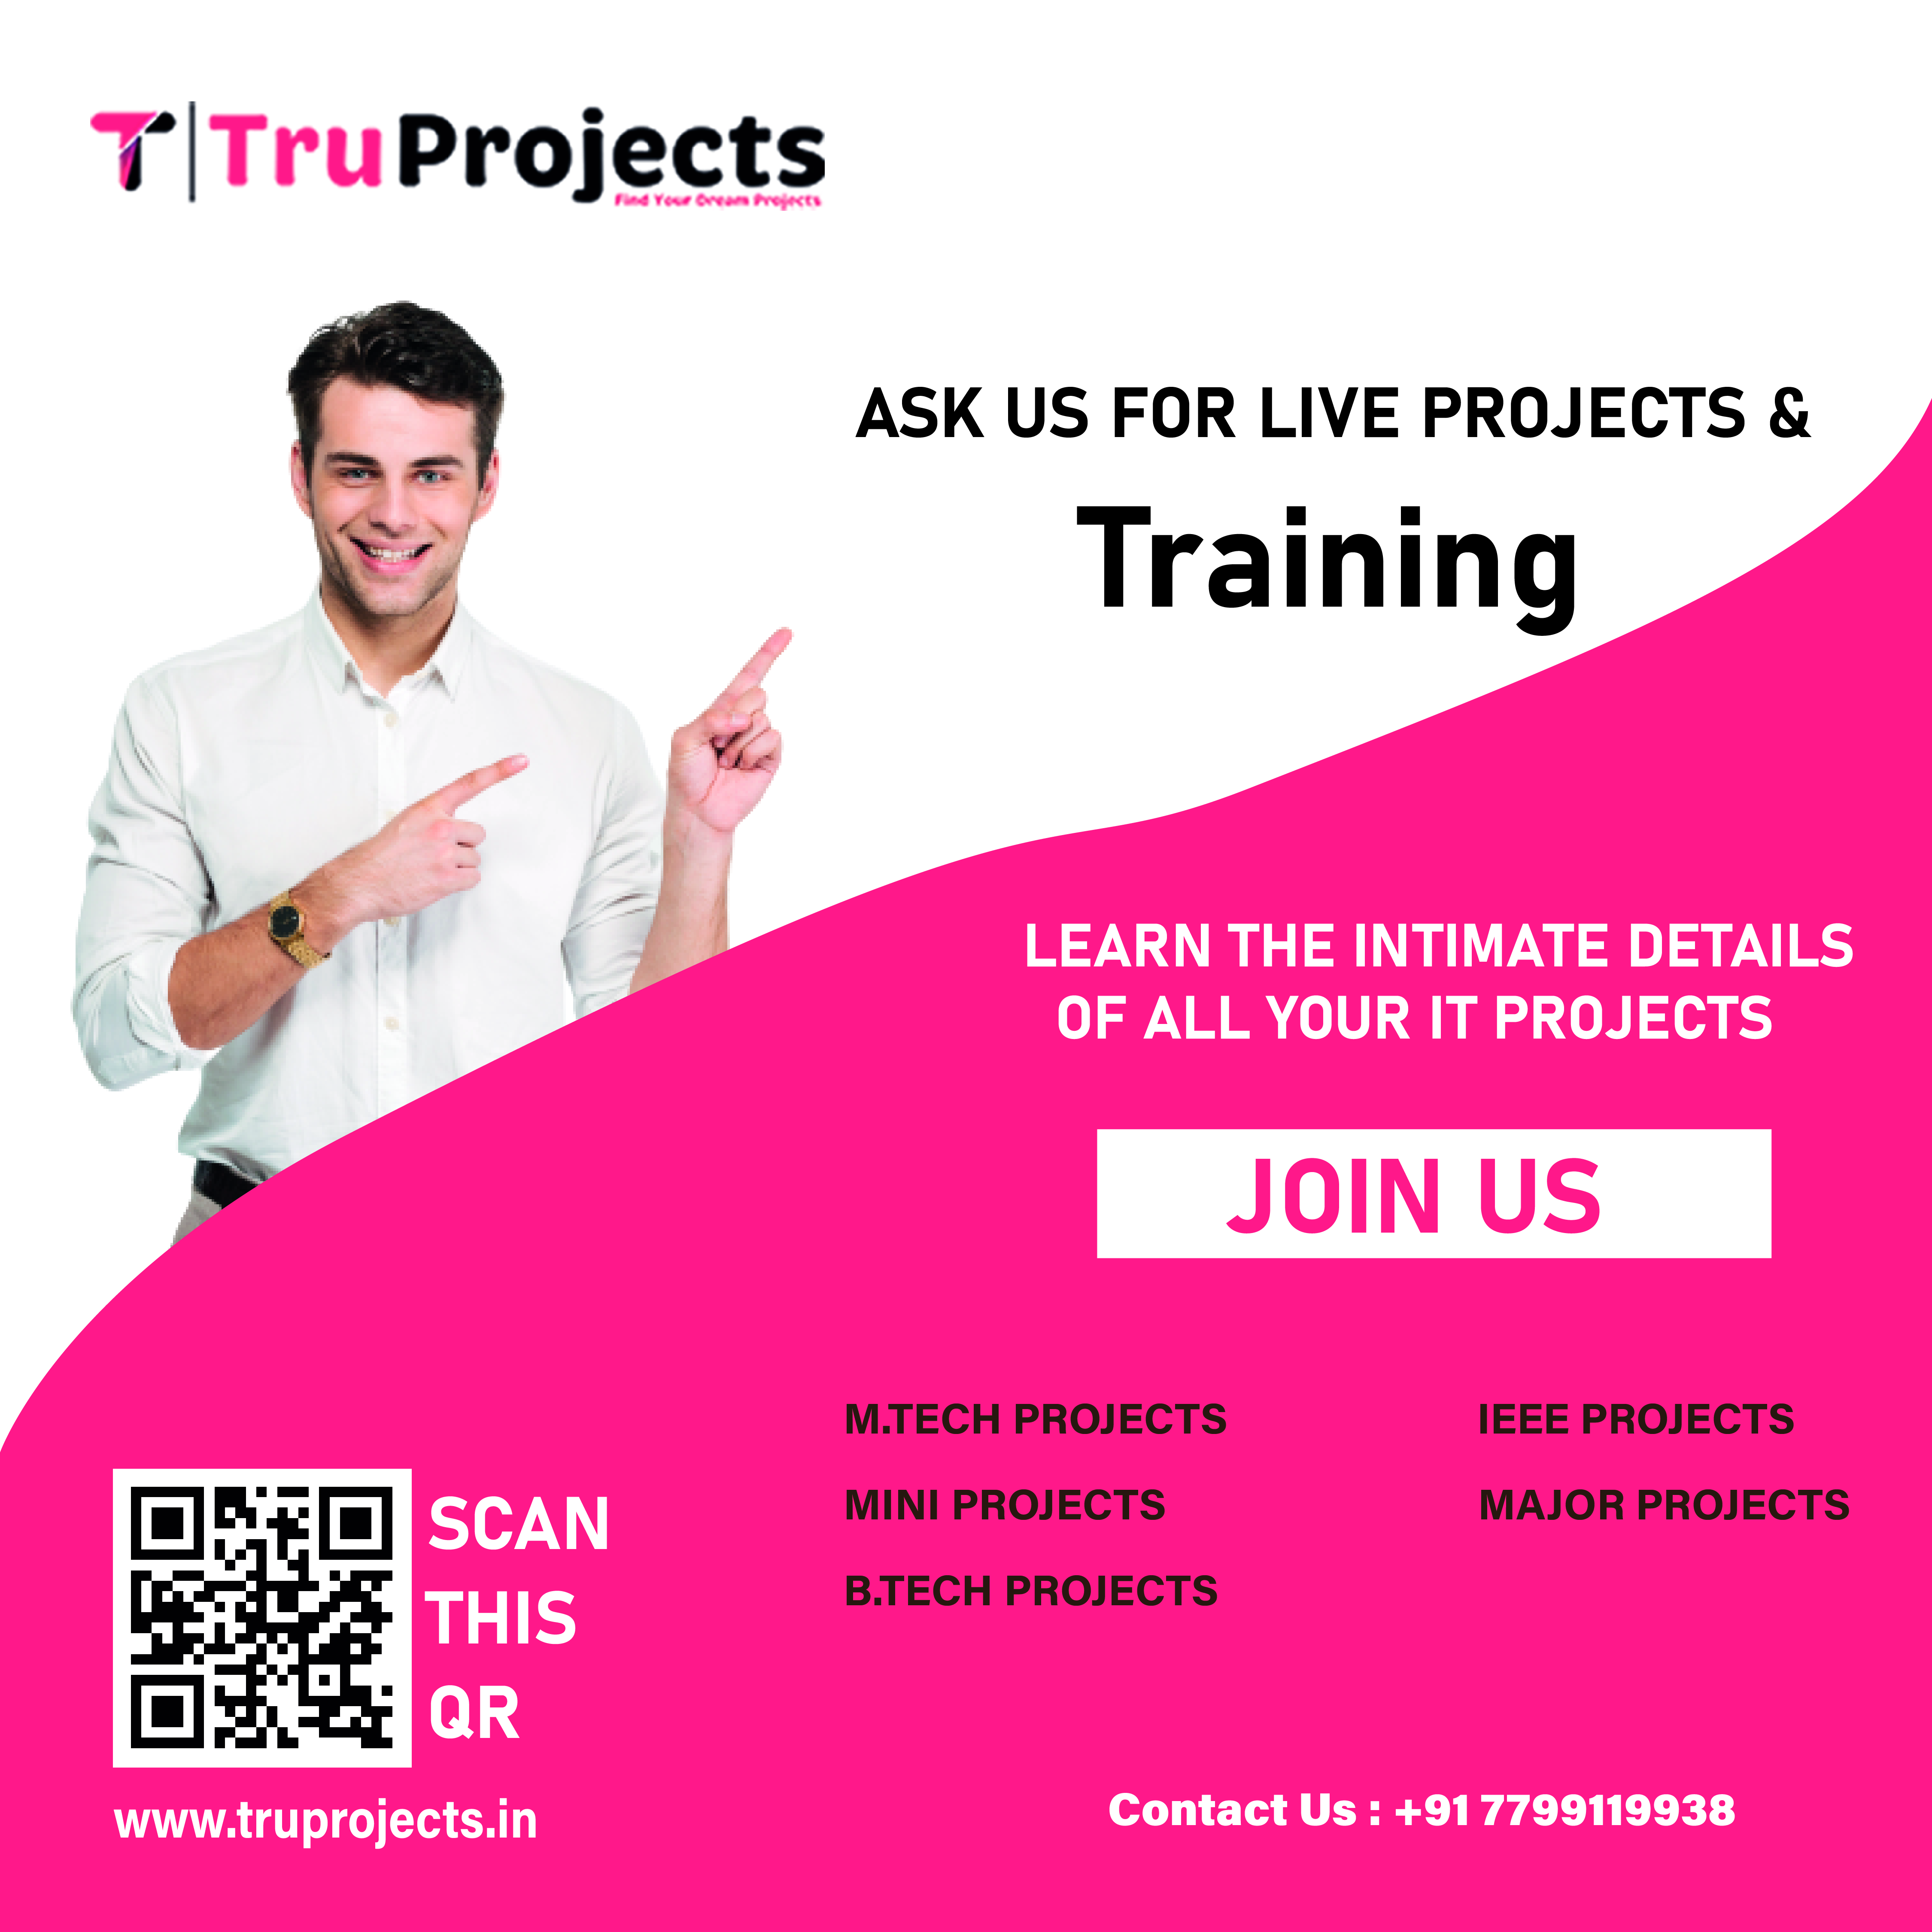 Live Cse Mini Iot Projects For Btech Engineering Students In Anantapur 17024155136